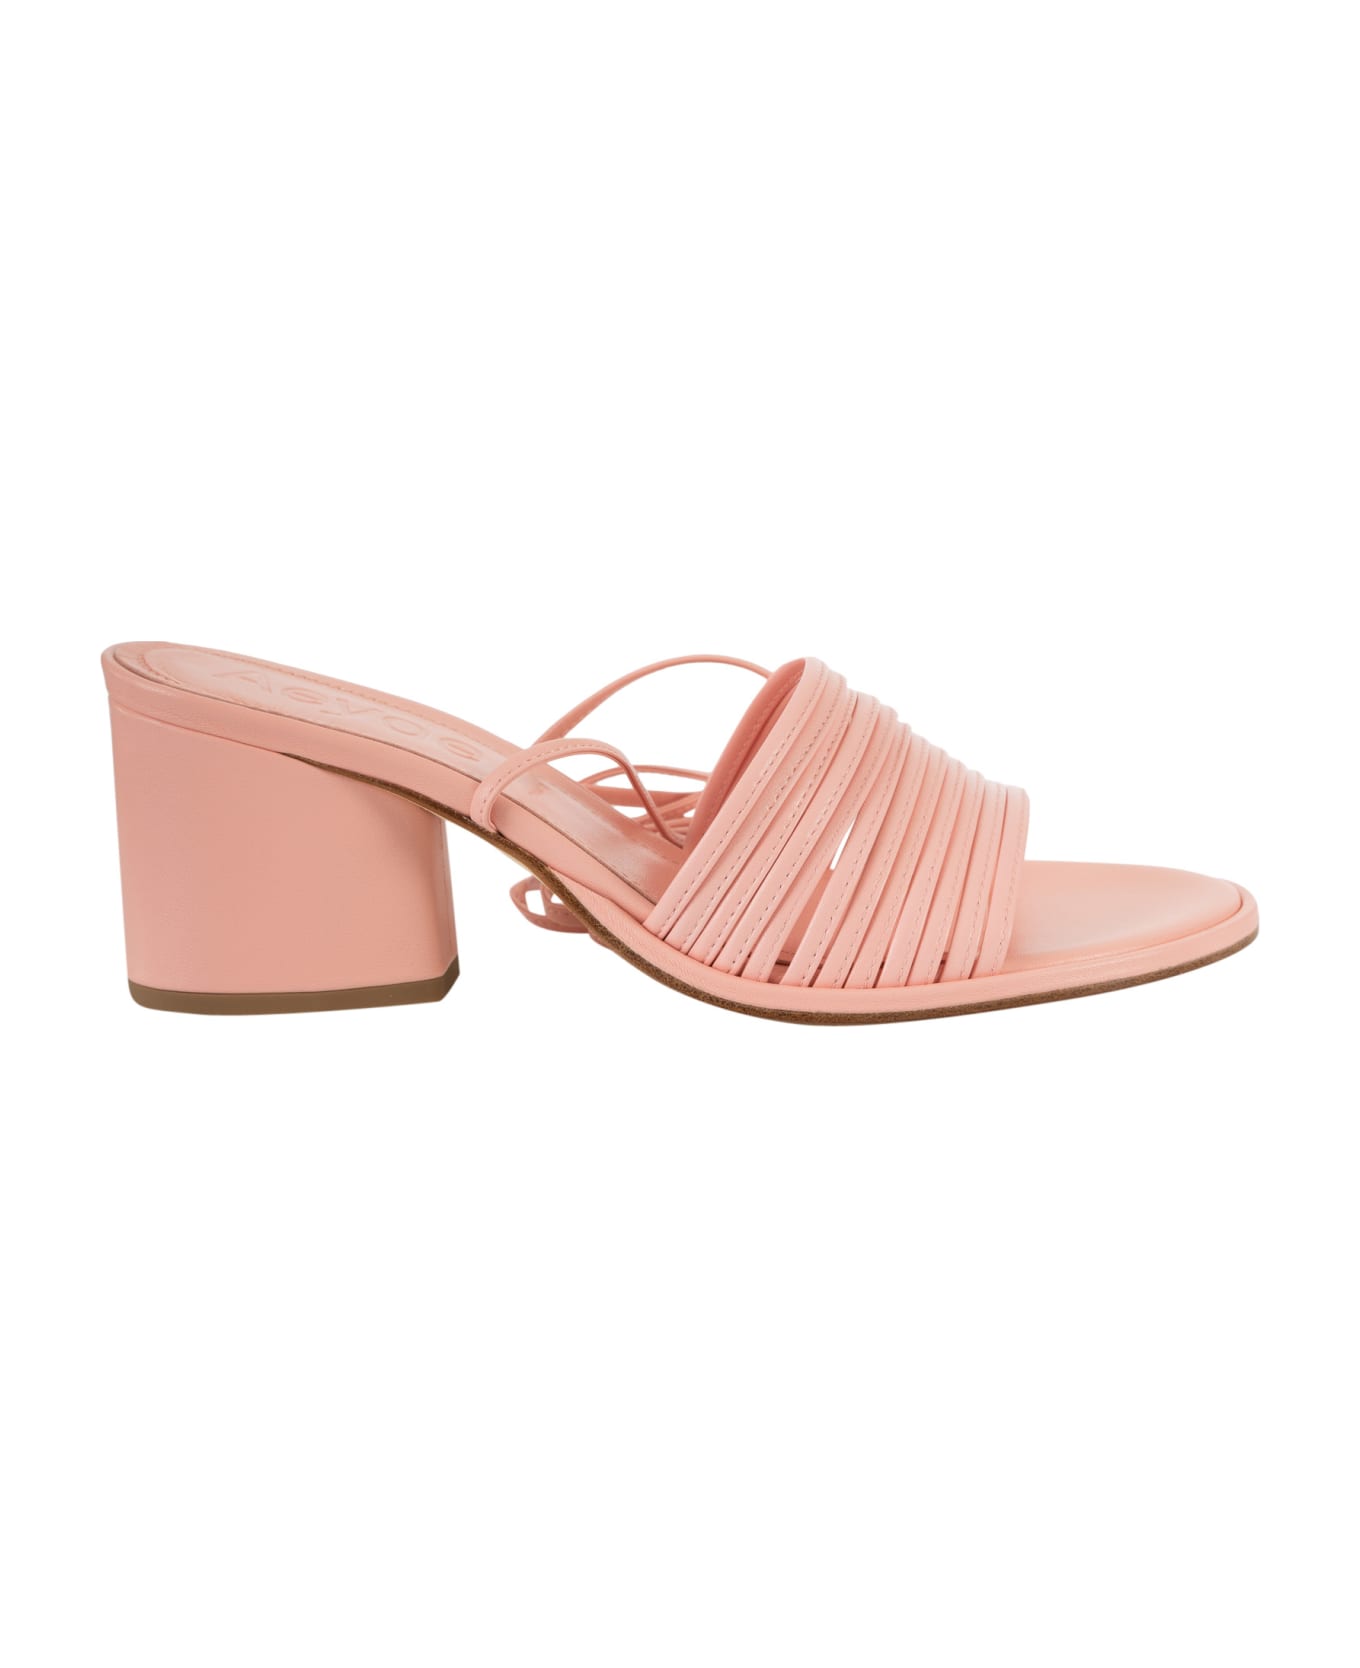 aeyde Natania Sandals - Pink